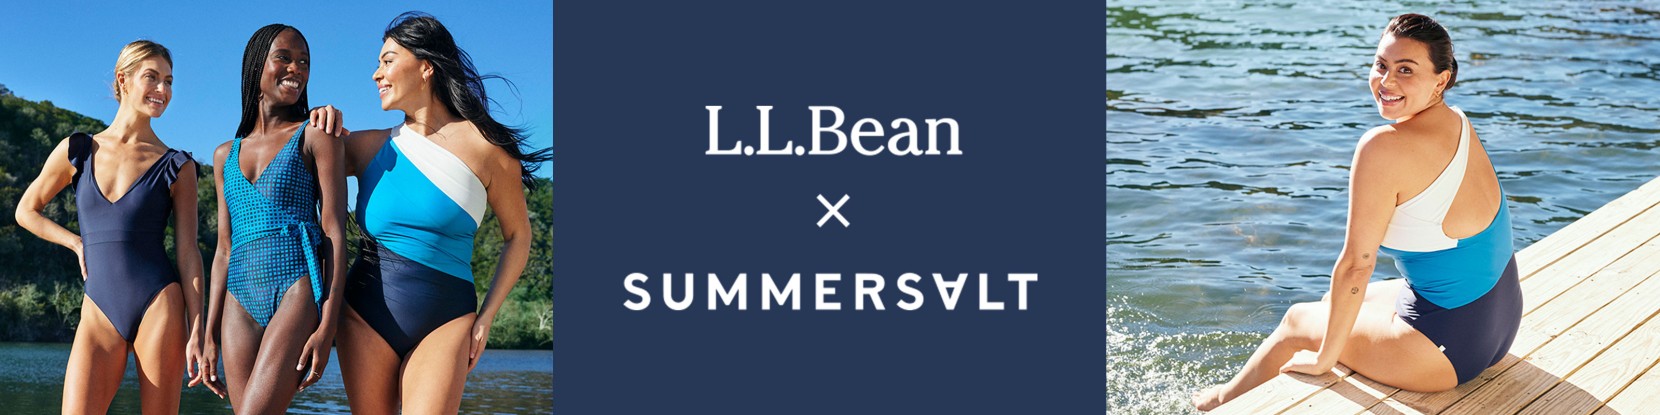 Images depicting women wearing swim suits at the lake and the LL Bean x Summersalt logo.